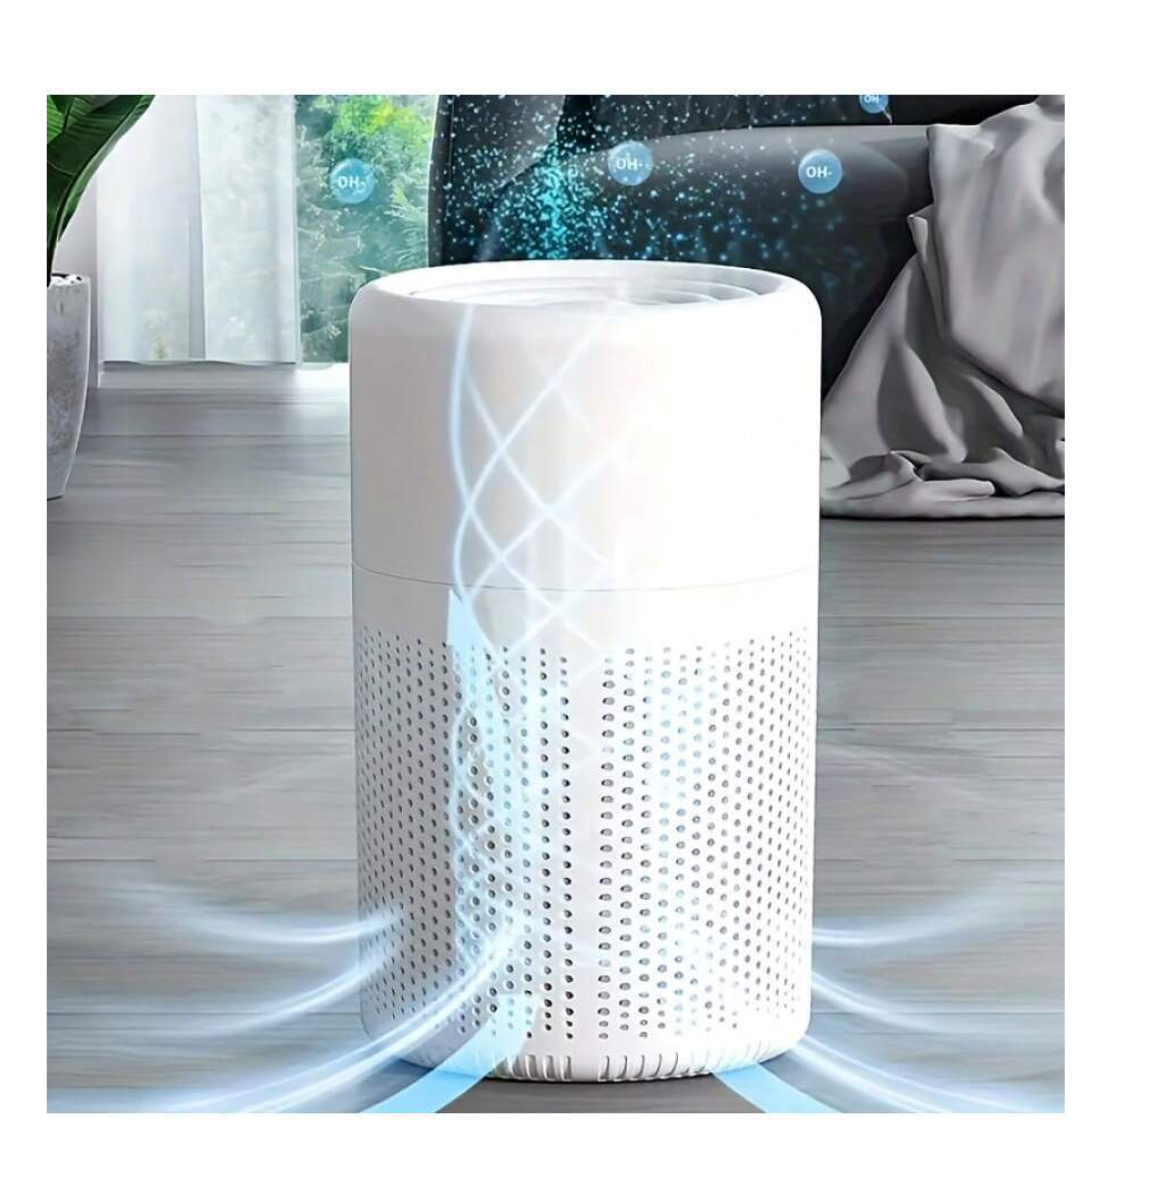 Fresh Air Oasis: HEPA Purifier with Fragrance Sponge & Activated Carbon Filter - Banish Odors & Pollutants Everywhere!